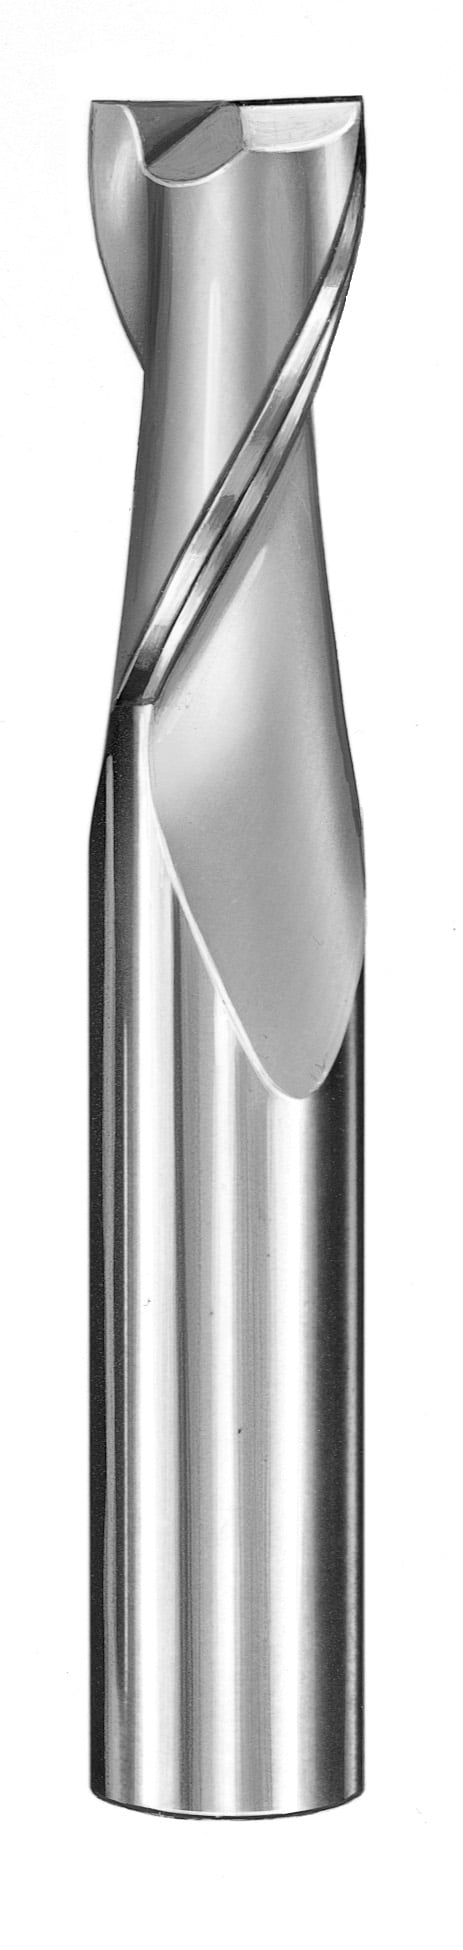 1/16" Dia, 2 Flute, Square End End Mill - 30307